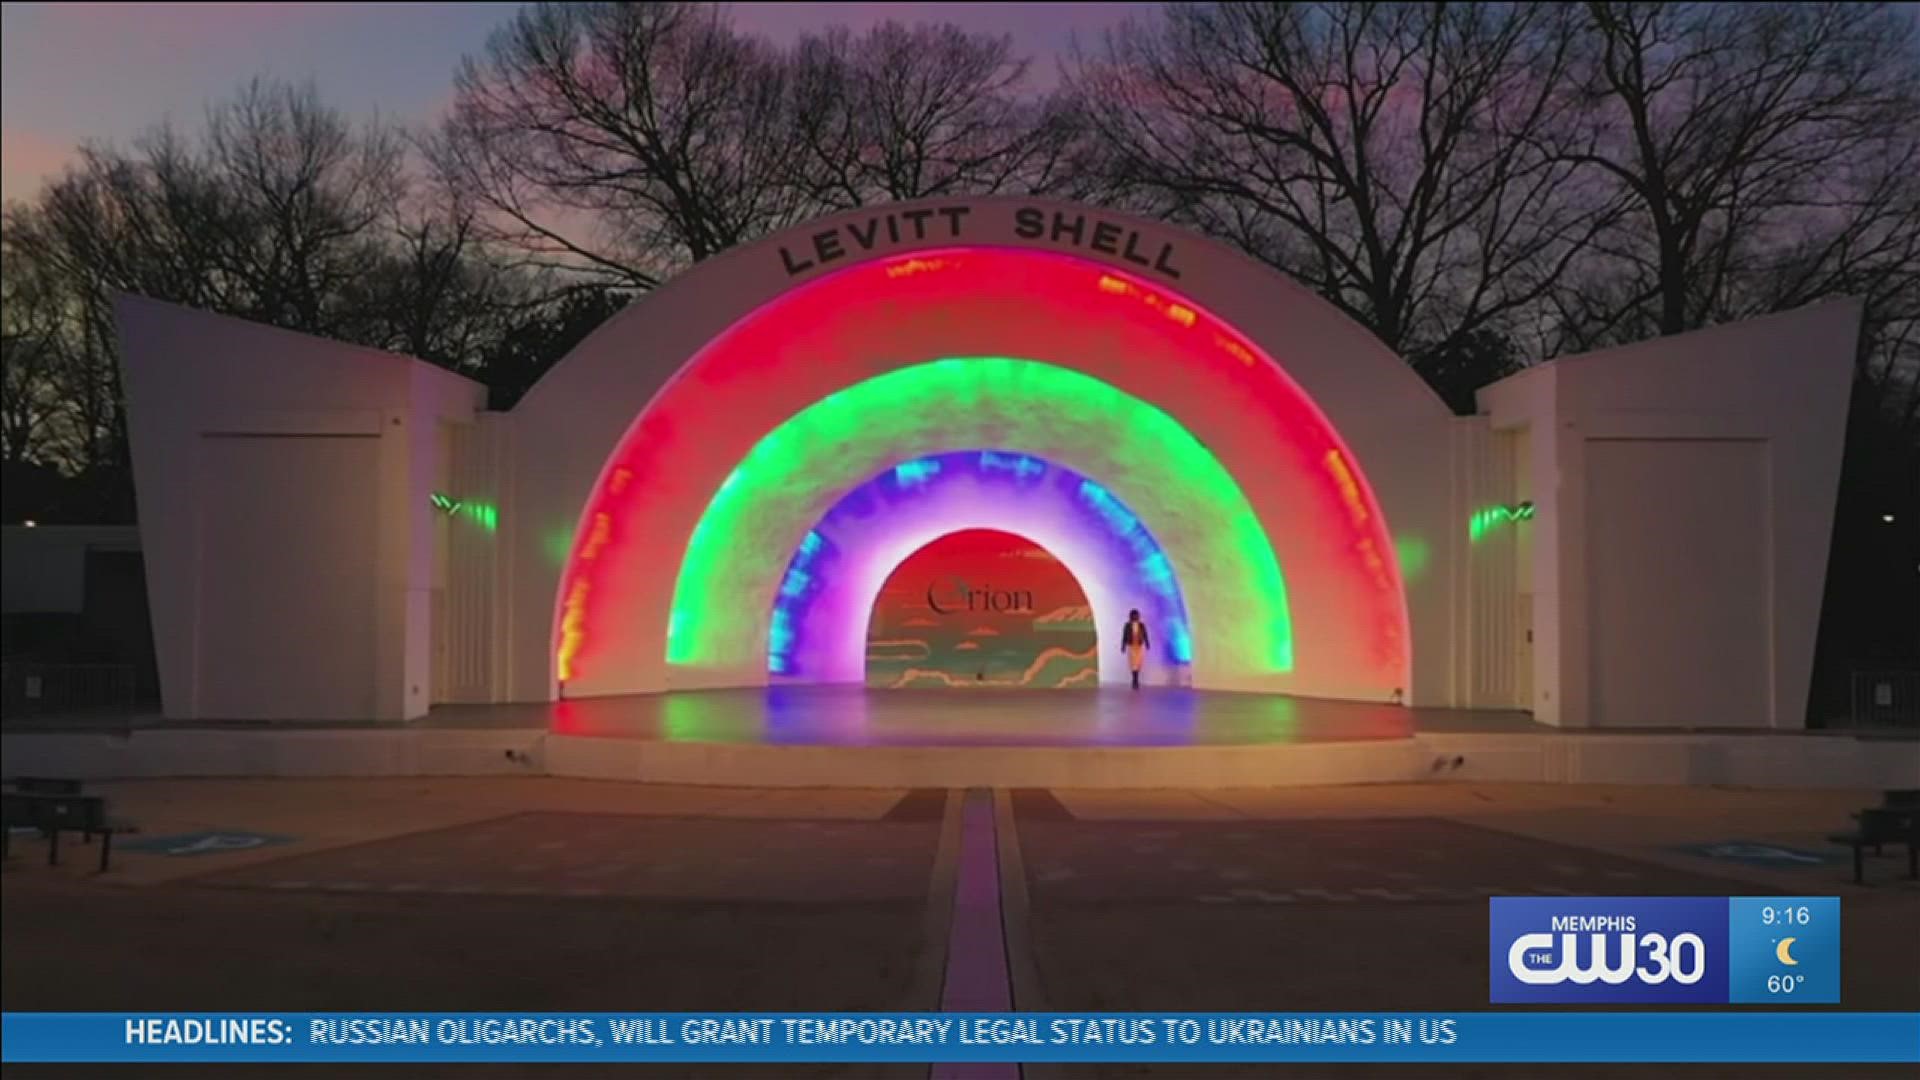 The event venue formerly known as The Levitt Shell has a new name: The Overton Park Shell.